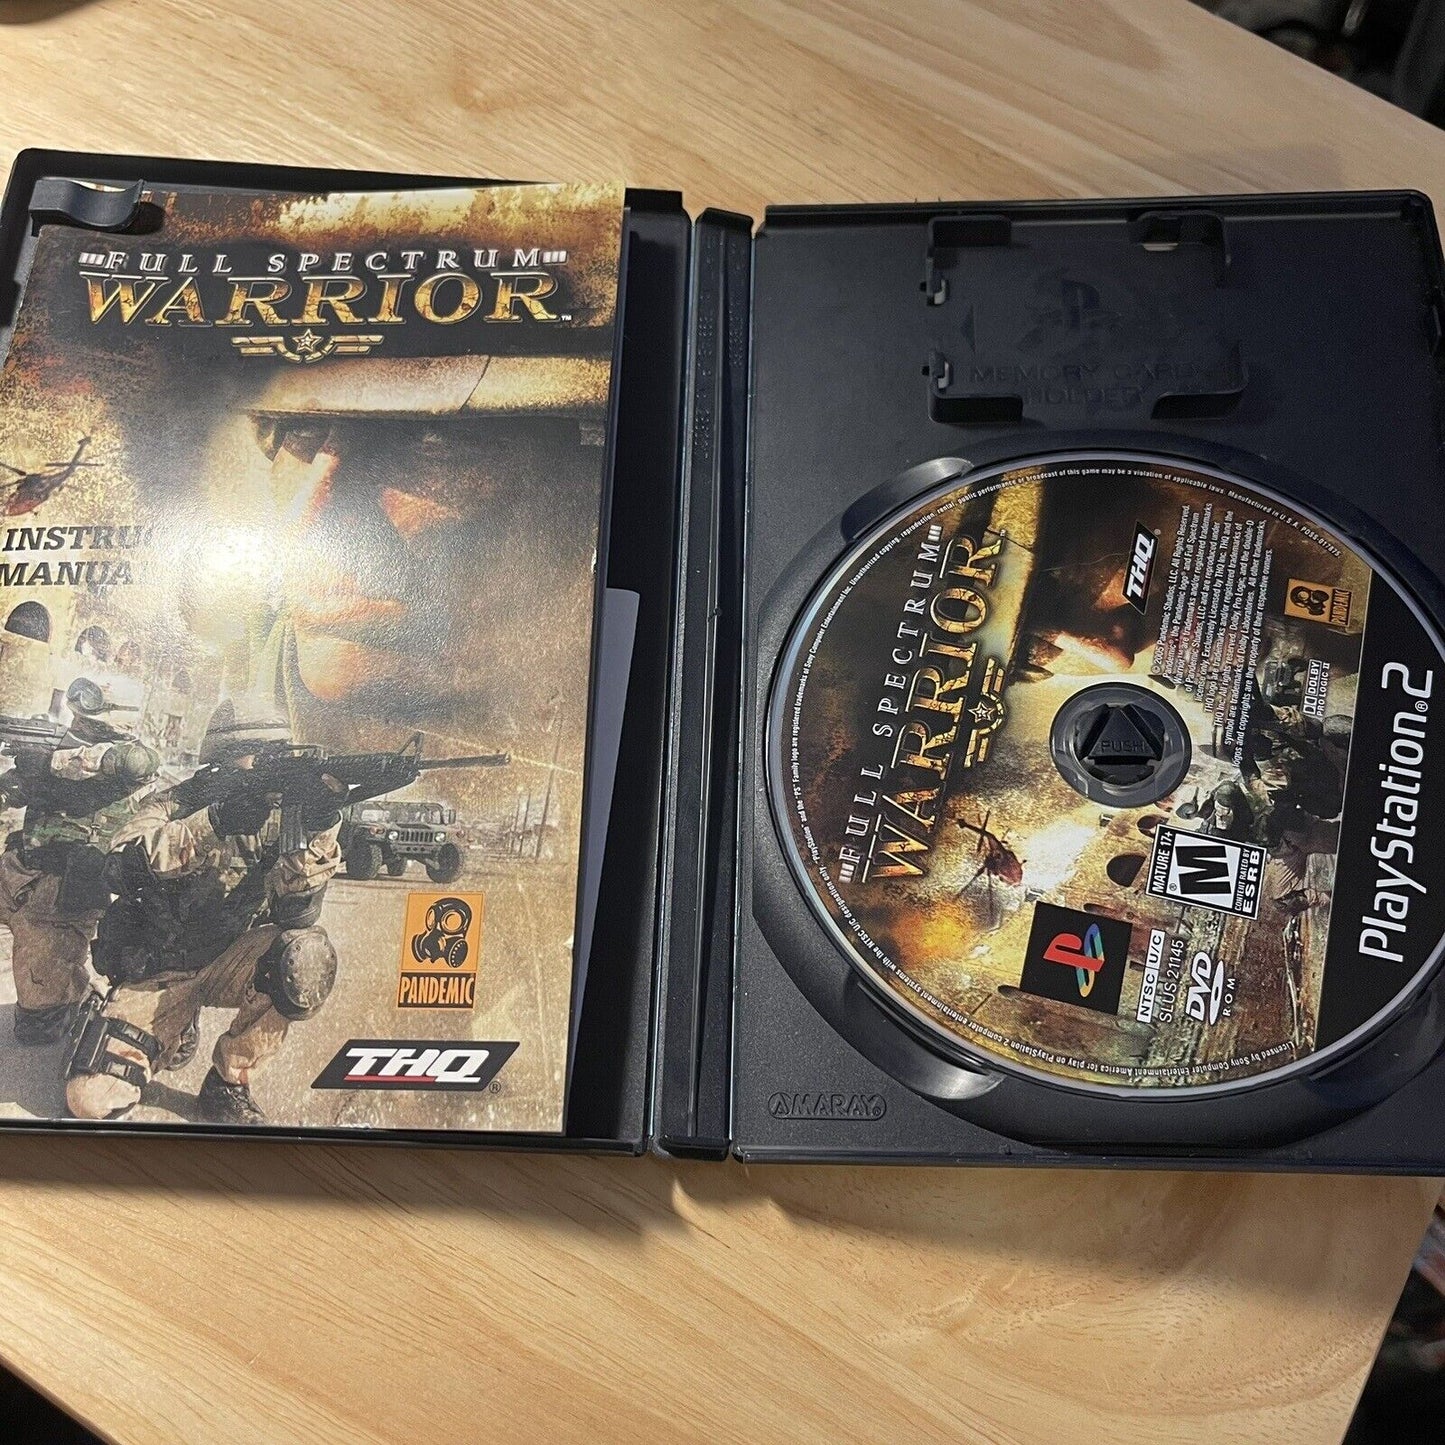 Full Spectrum Warrior (Sony PlayStation 2, 2005) - PS2 Complete CIB Tested